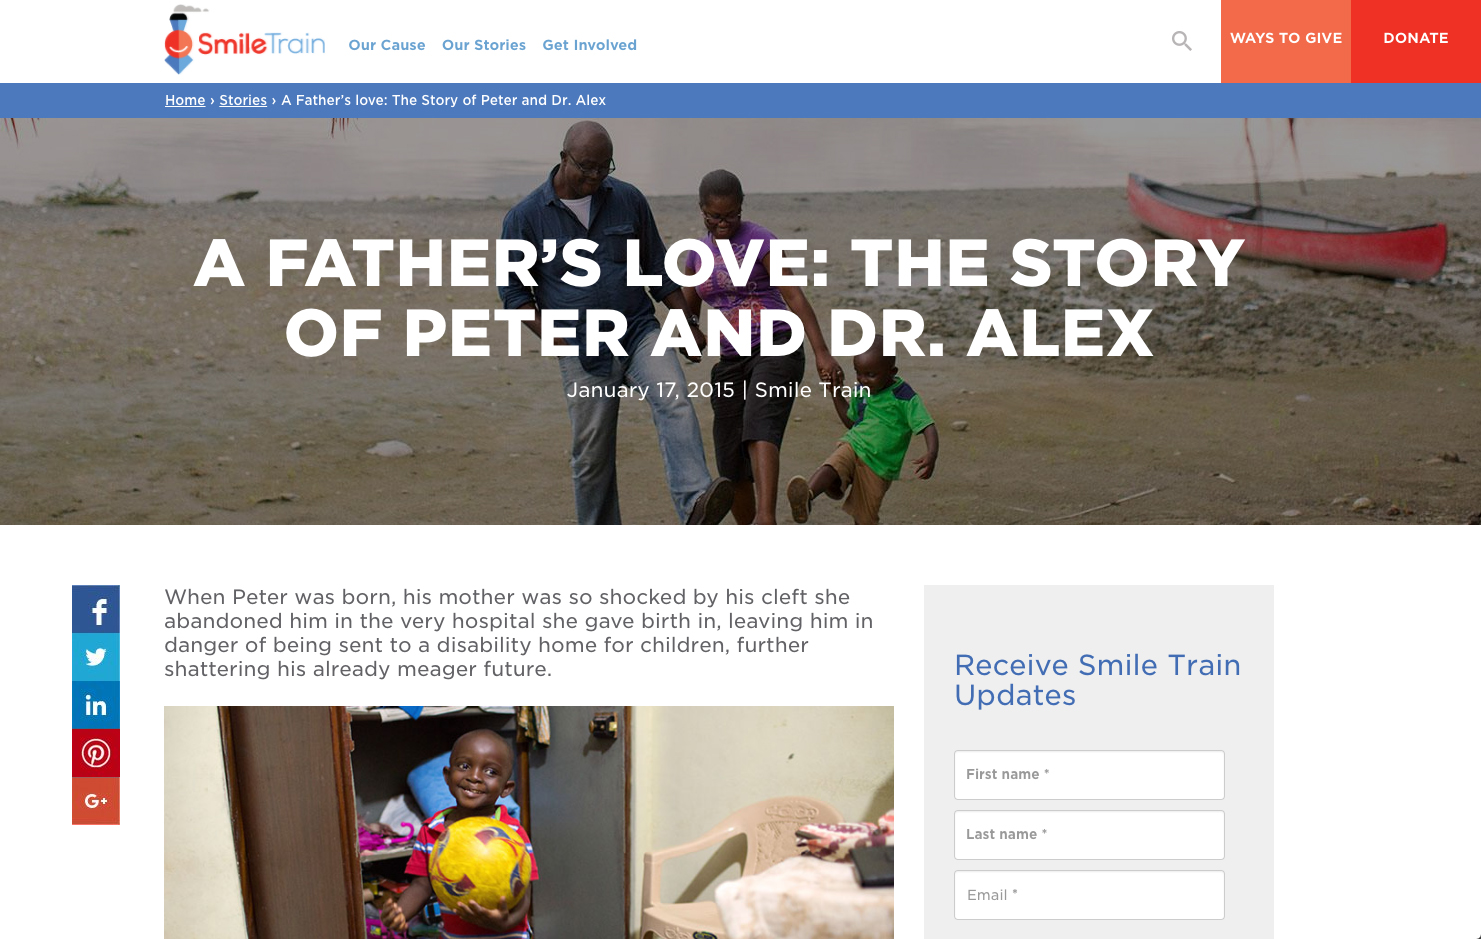 A Father's Love: The Story of Peter and Dr. Alex 